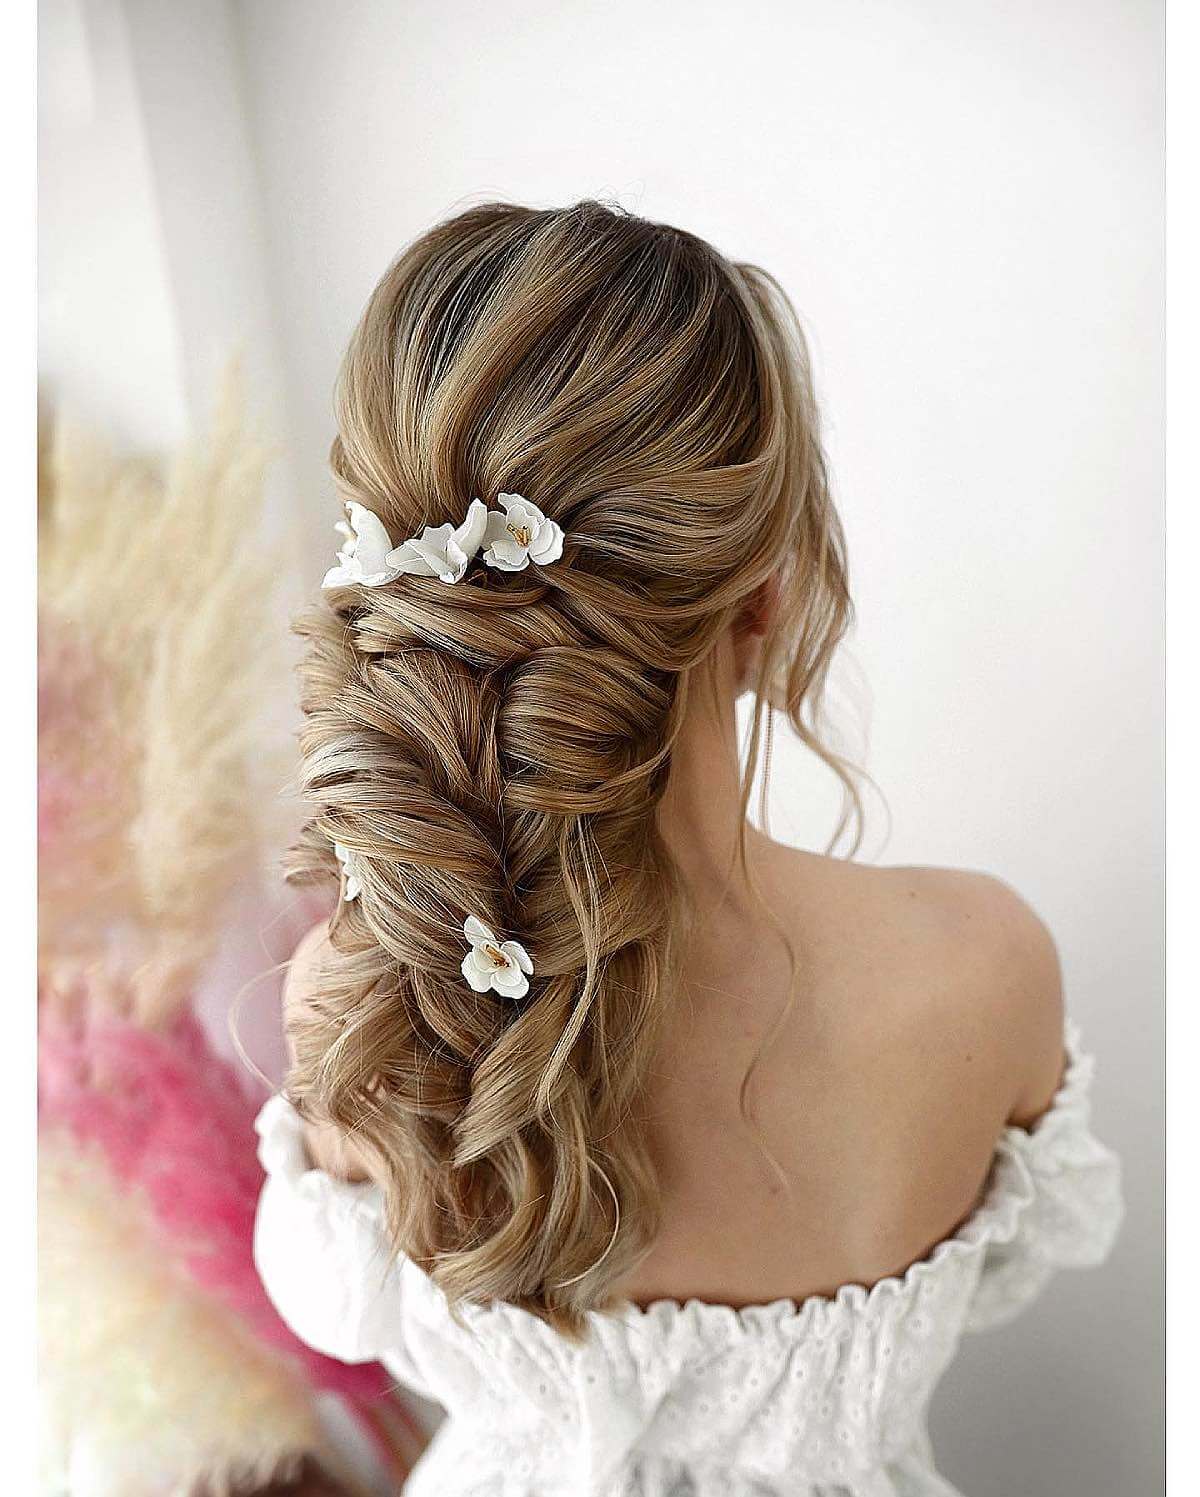 the flower princess hairstyle